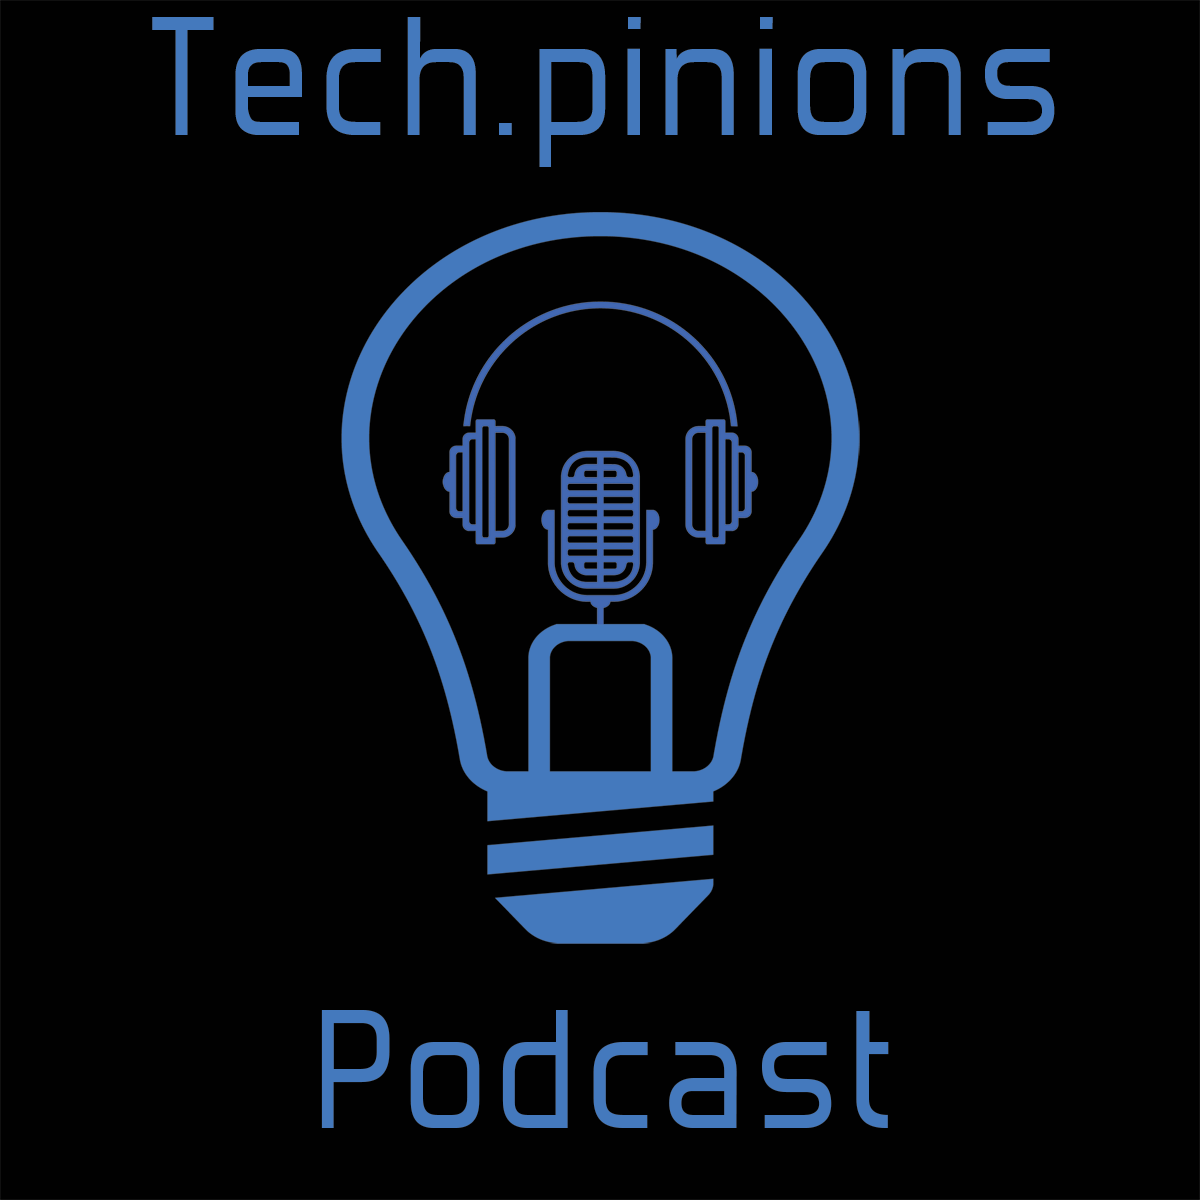 Podcast: Samsung, Low-cost smartphones, Wearables, and MWC